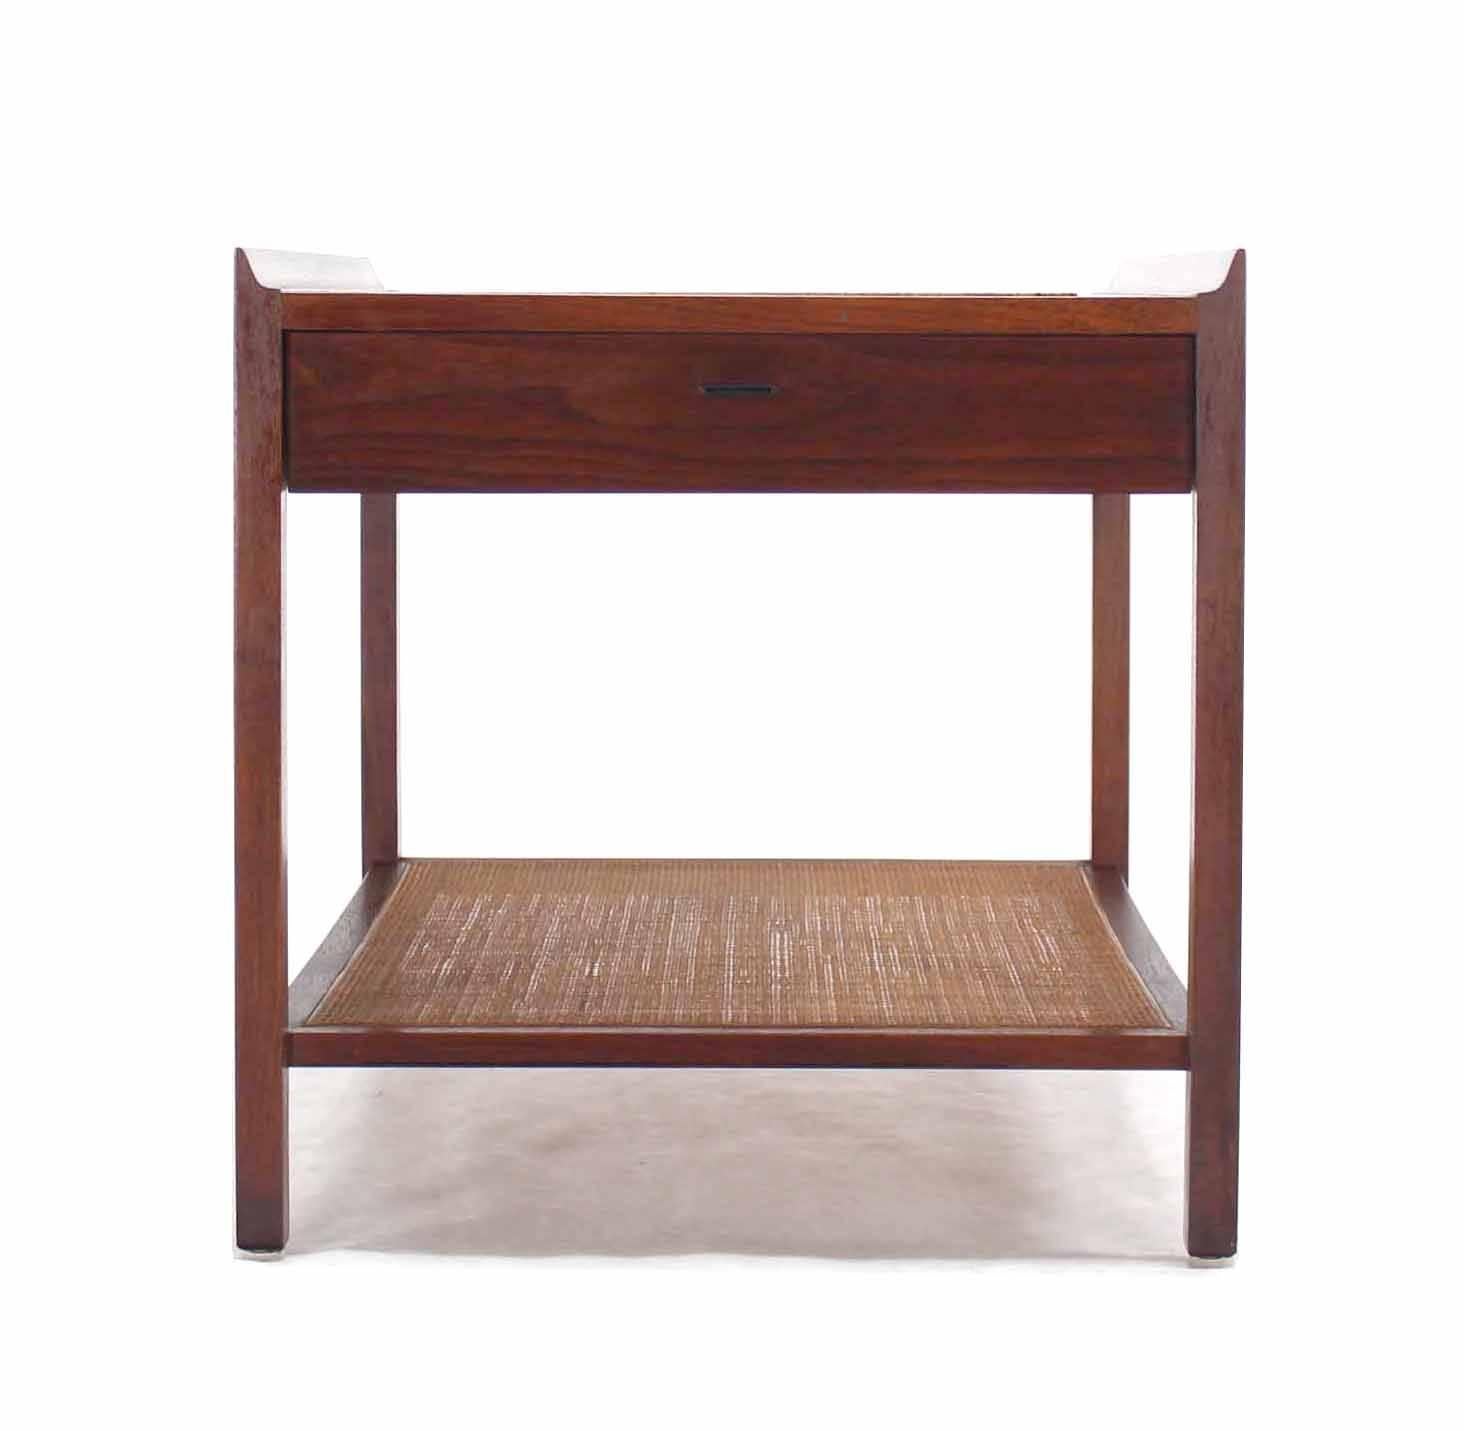 20th Century Walnut Side End Table with Travertine Insert & Cane Shelf